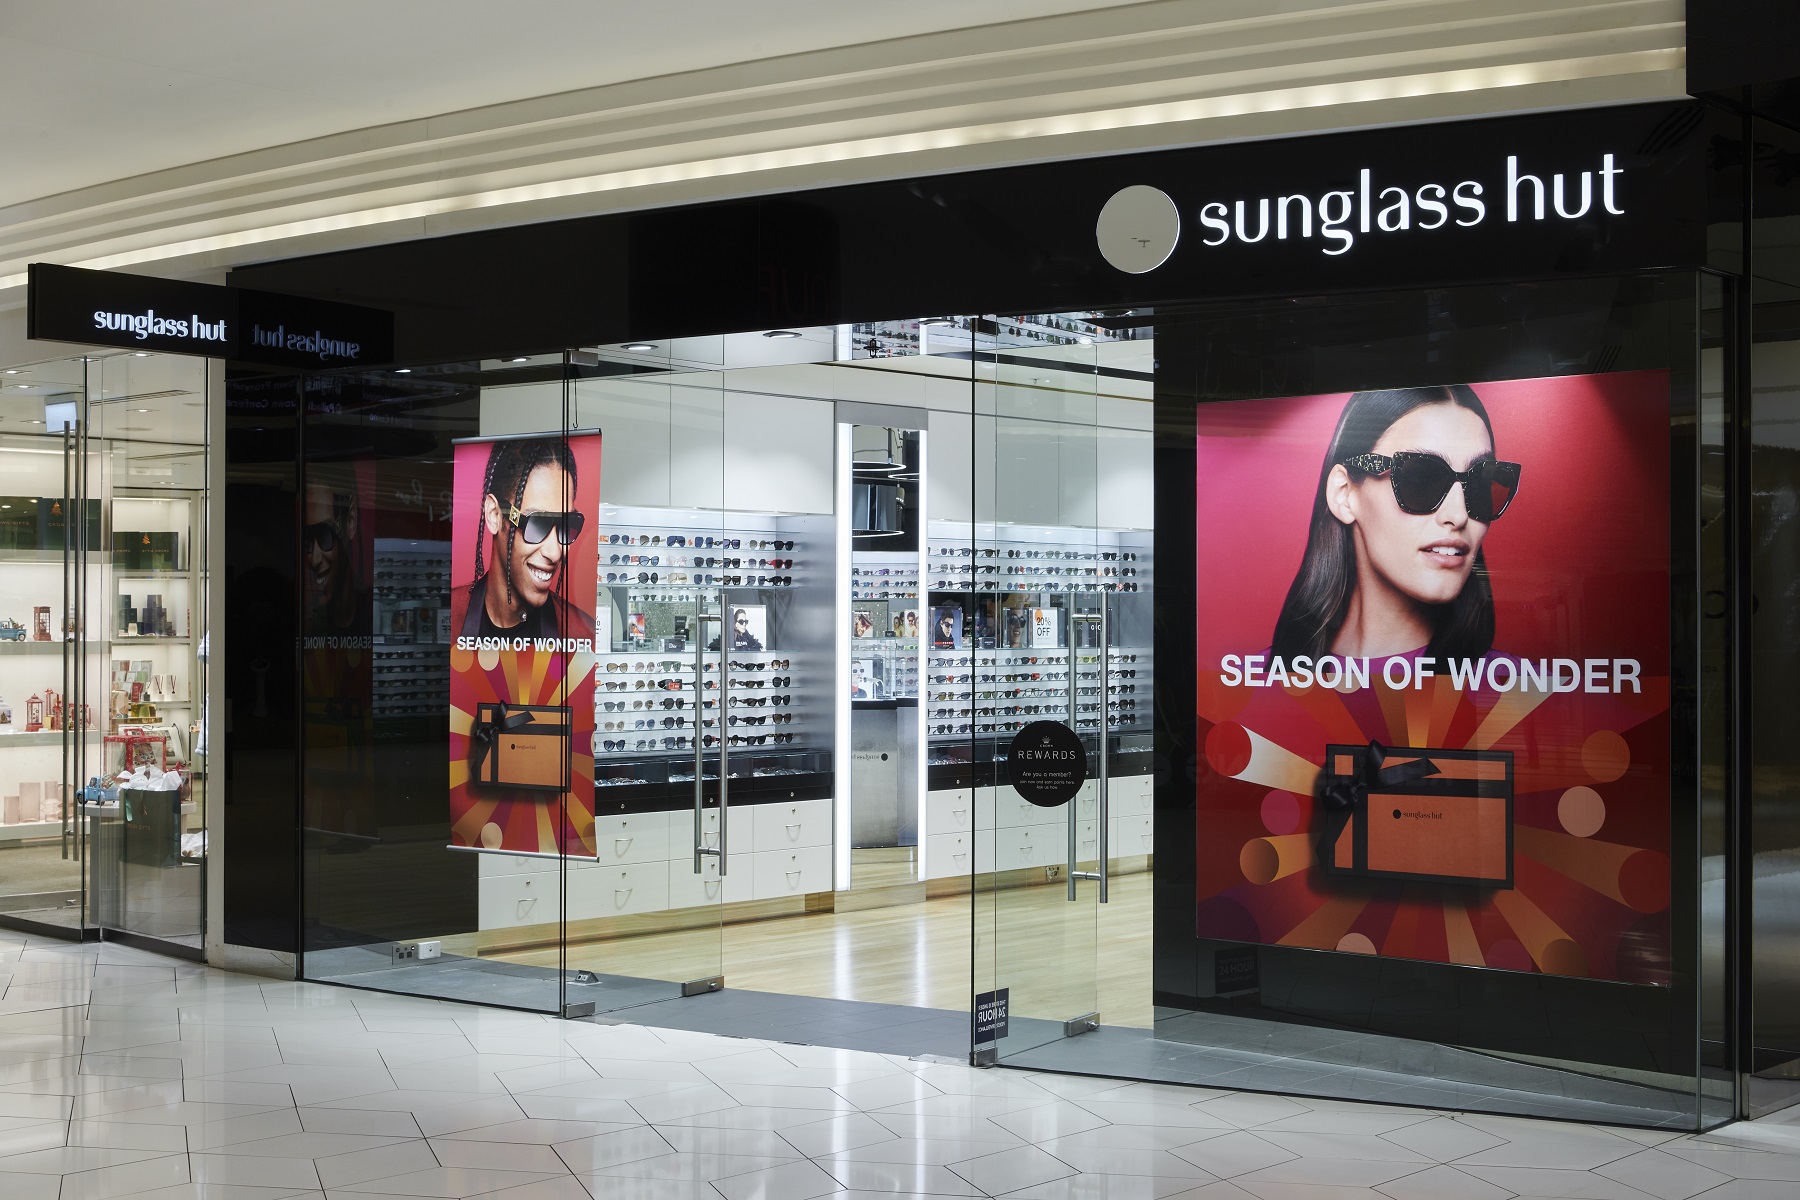 Hudson Inks Expanded Agreement With Sunglass Hut To Operate New Standalone  Travel Retail Stores in North America | Business Wire